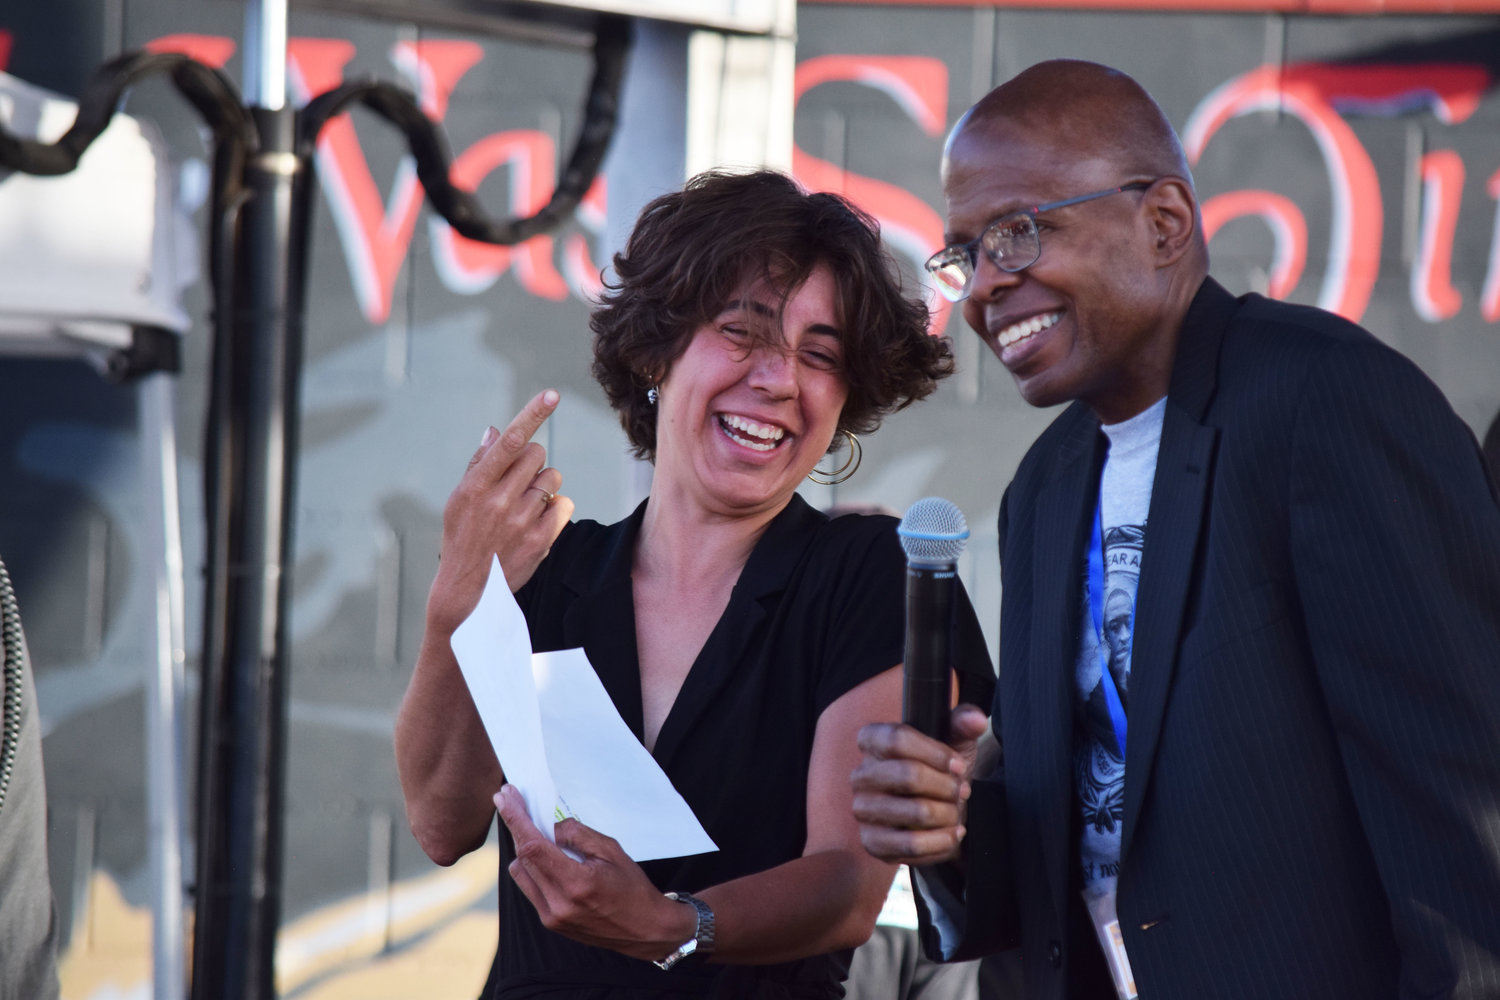 Madi Ramirez-Tentinger (at left) and Vins Harrelson share a laugh as emcees for the Concert Honoring Families of Injustice or Loss at the Rise & Remember event on May 25th at George Floyd Square.